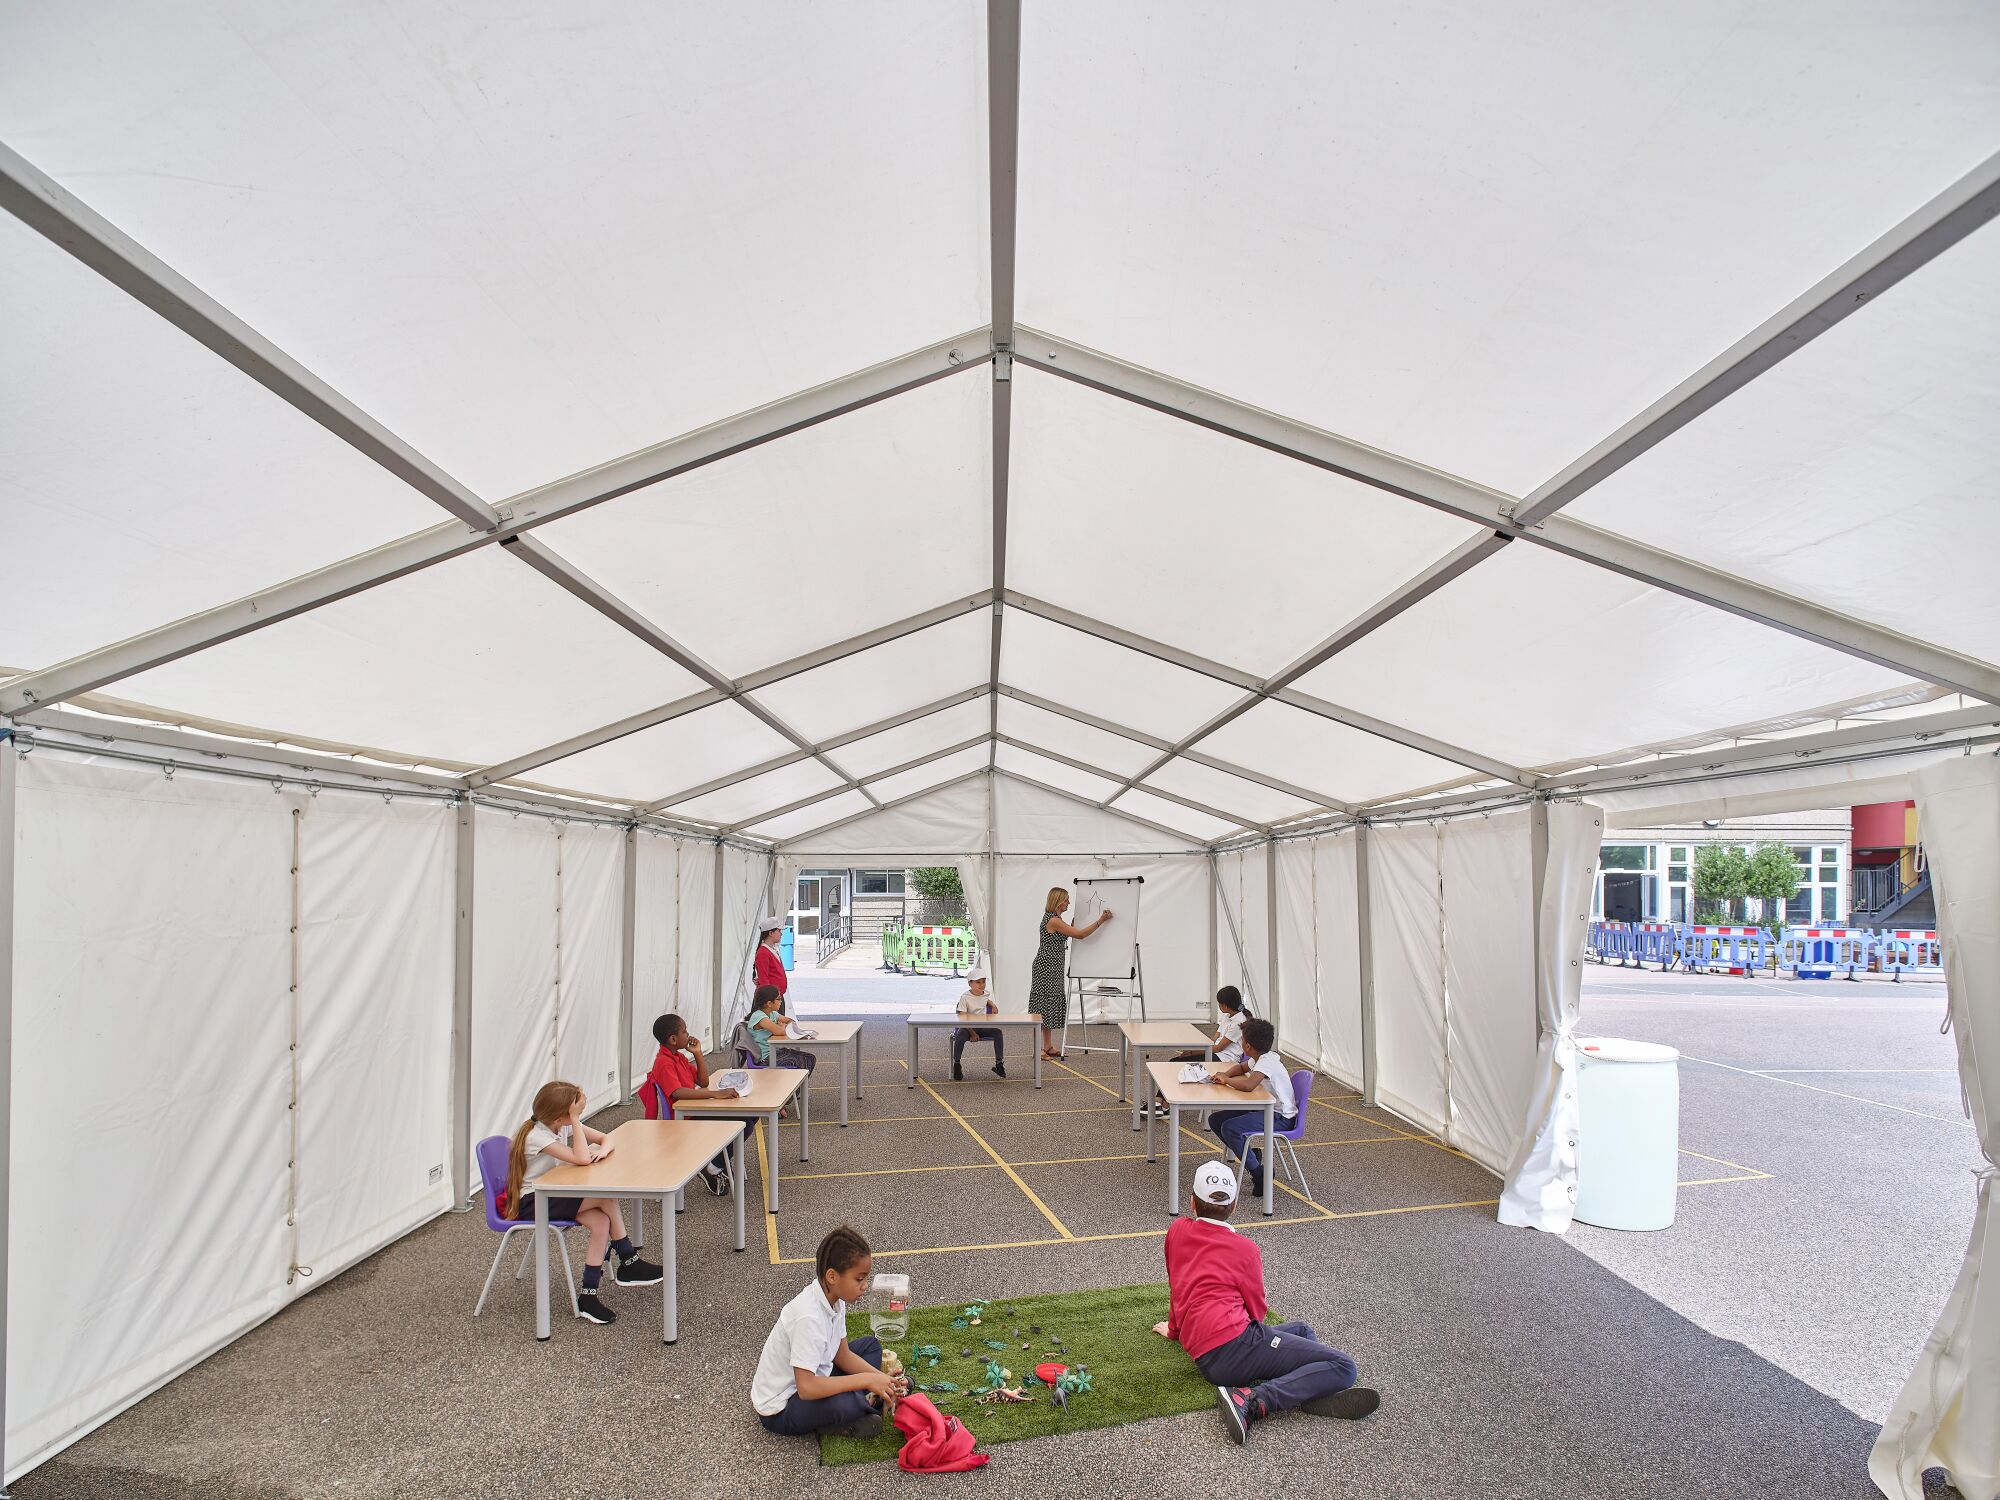 Students inside one of Curl la Tourelle Head Architecture's early tent projects at Manorfield Primary School in London.